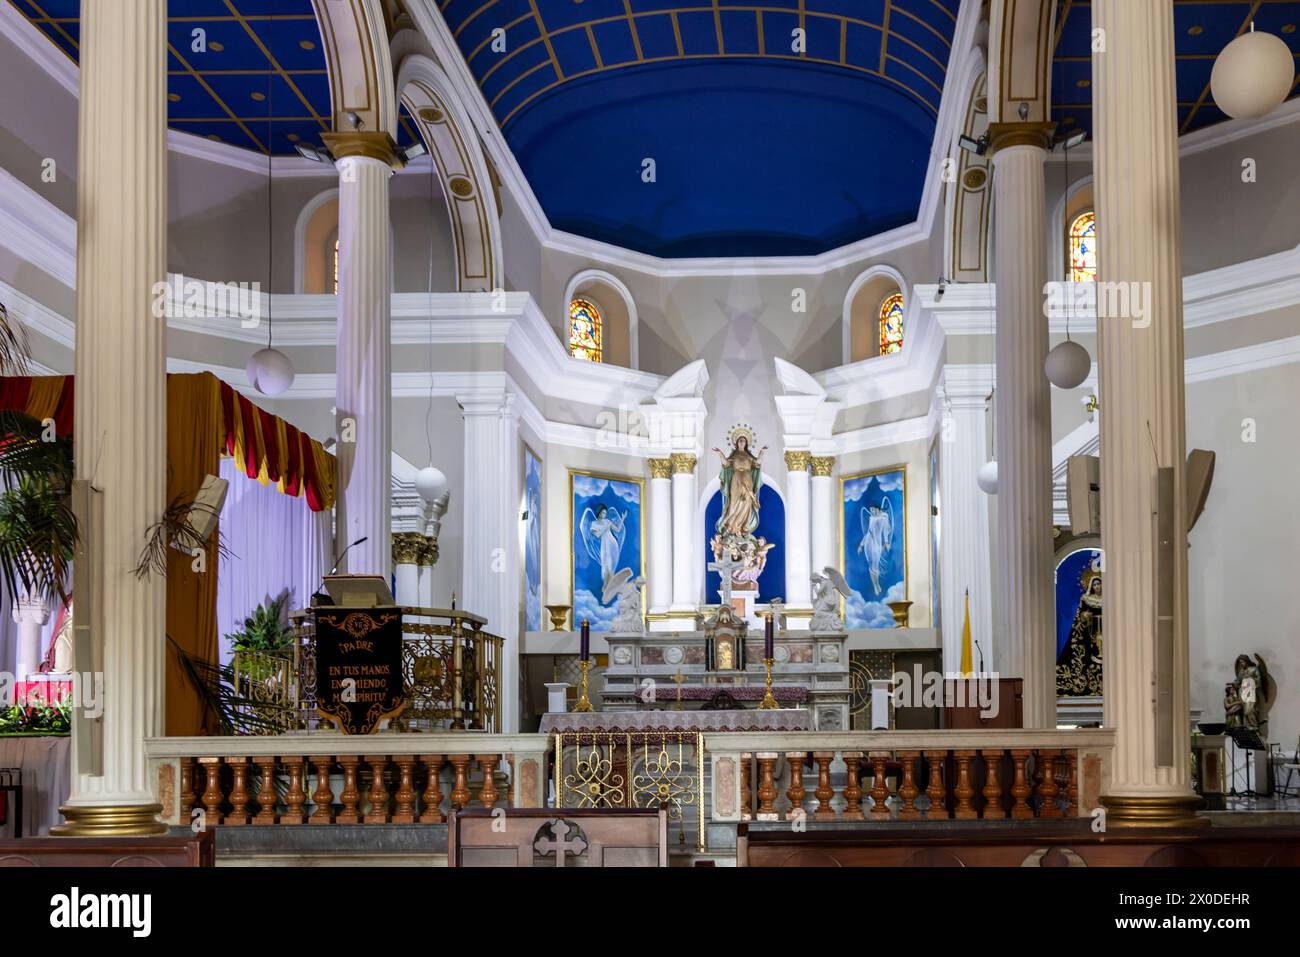 Interior of Our lady of Soltitude catholic church in baroque style the center of San Jose in Costa Rica Stock Photo